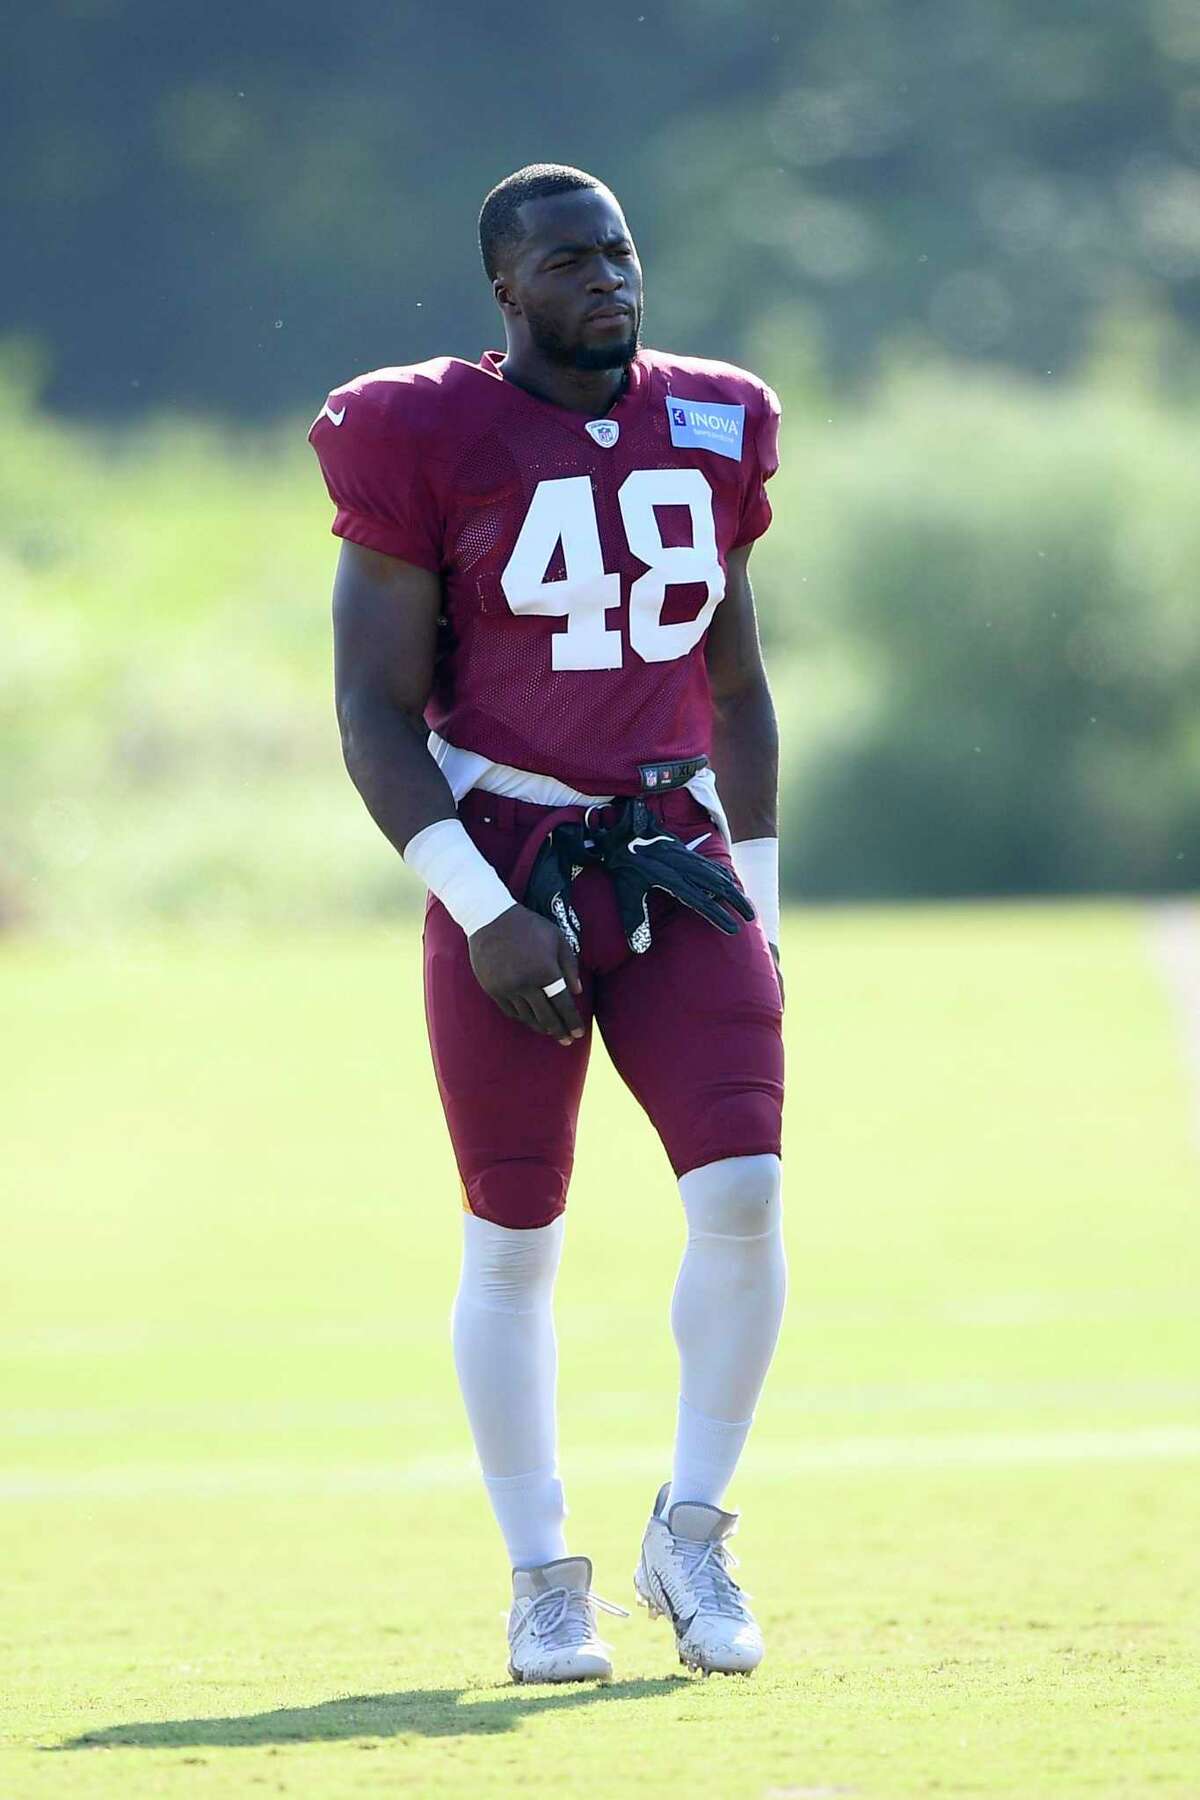 Washington linebacker Kevin Pierre-Louis stands on the field during practice at the team’s training facility.